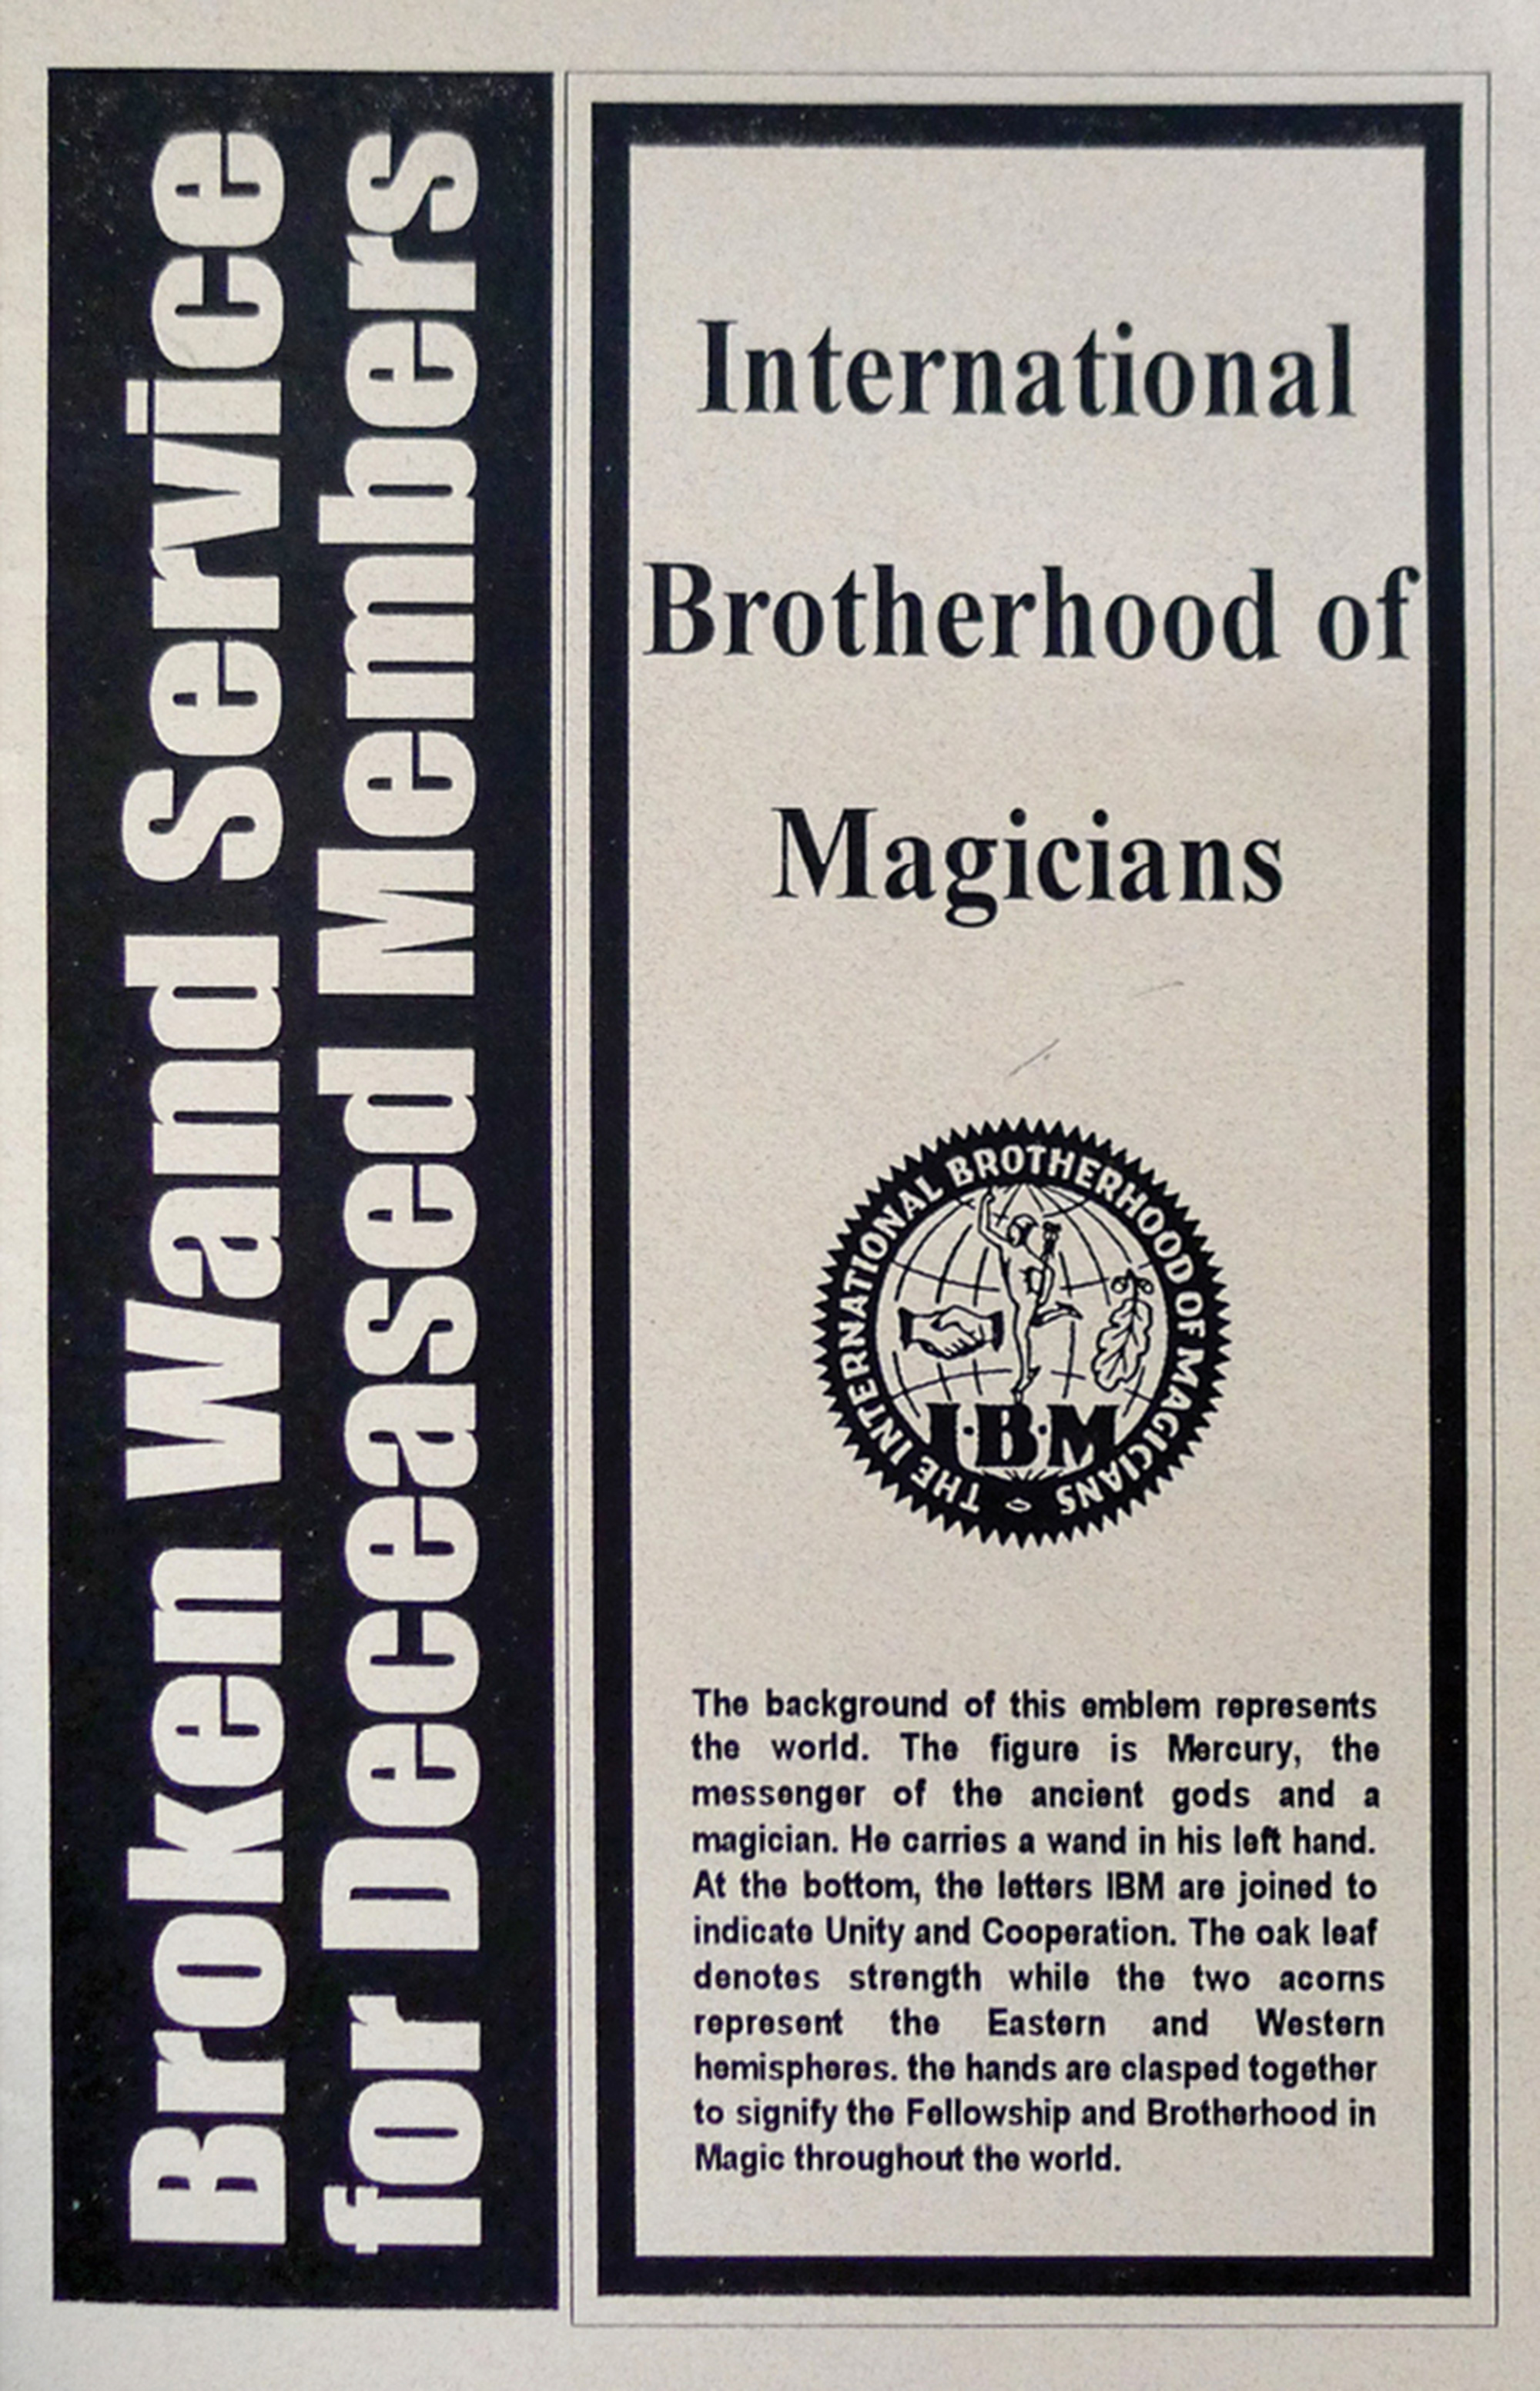 A photograph of the cover of the “Broken Wand Service for Deceased Members.”